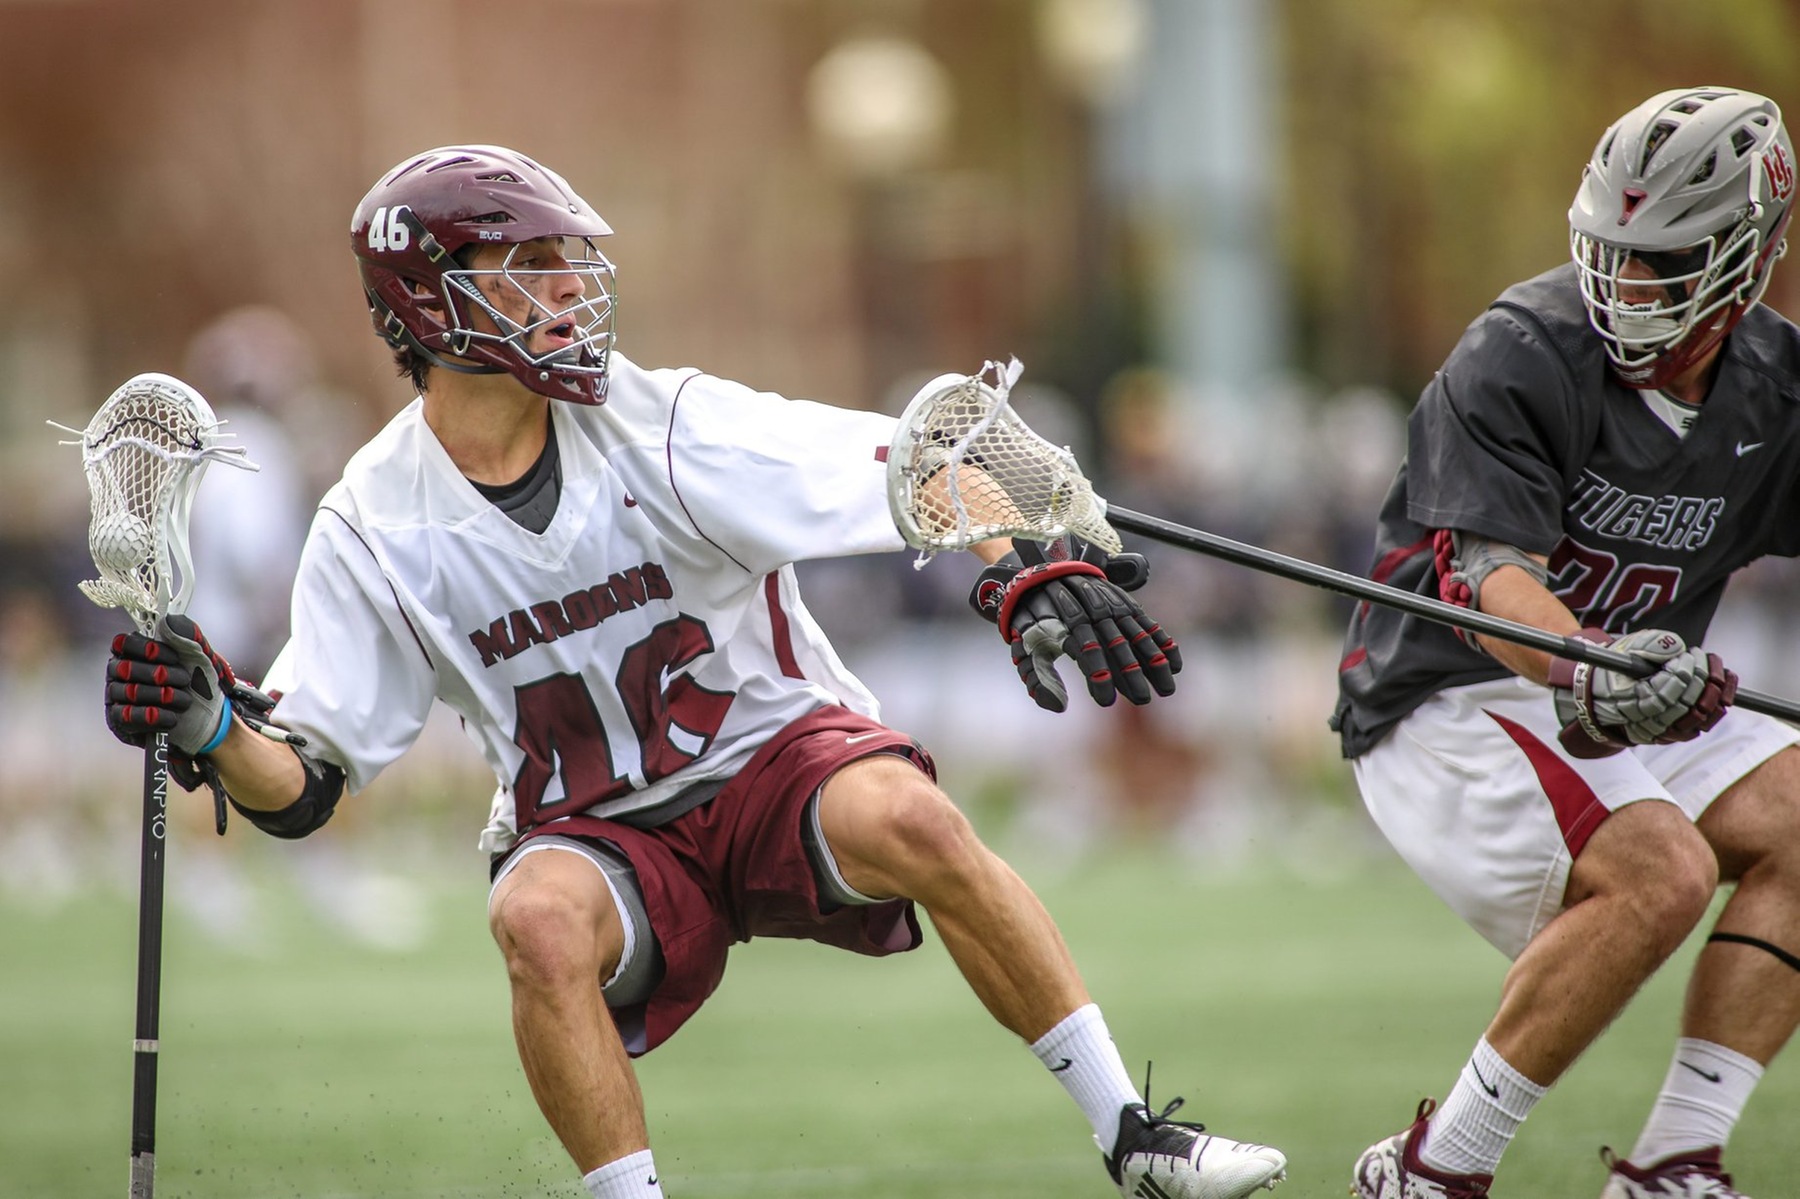 Roanoke used 11 second-half goals to knock off Kenyon 15-11 in men’s lacrosse action on Wednesday afternoon in Salem.